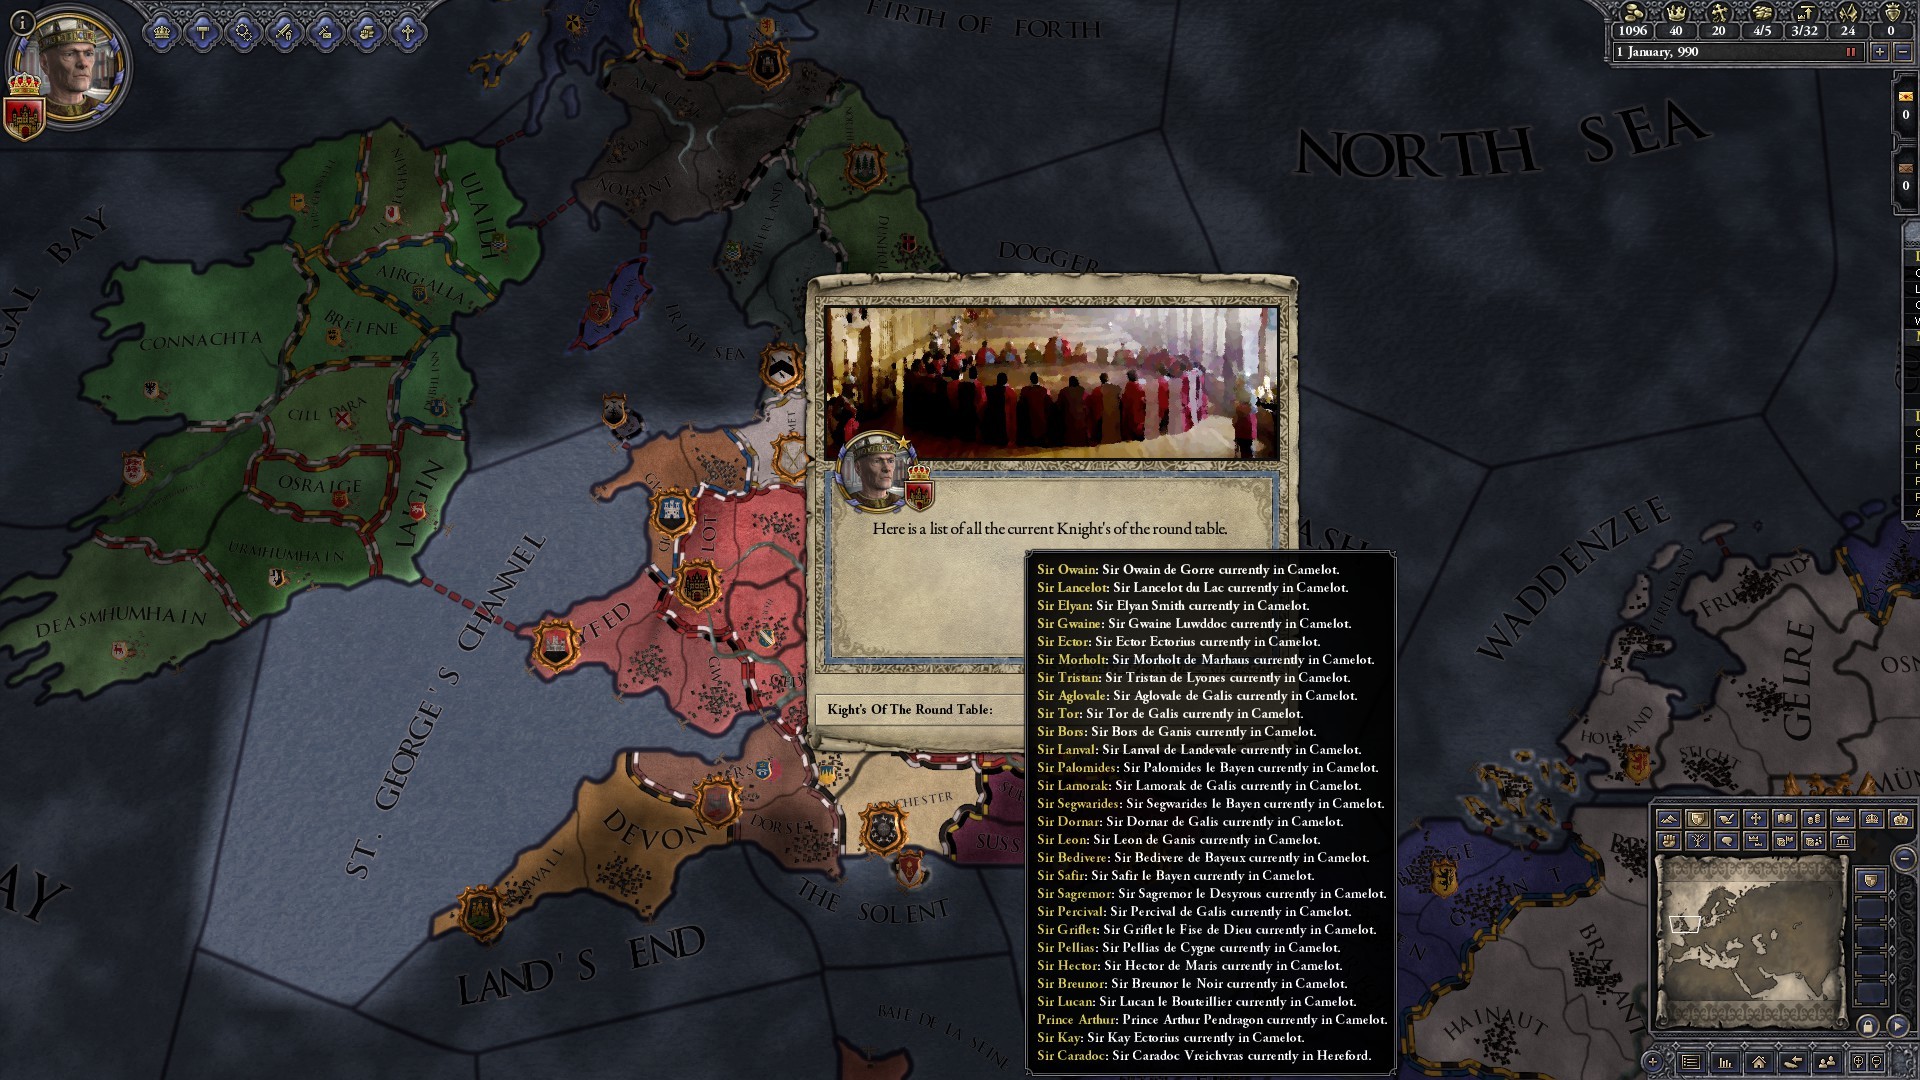 1920x1080 The Knights of the Round Table image - Crusader Kings 2: Wizarding World  mod for Crusader Kings II